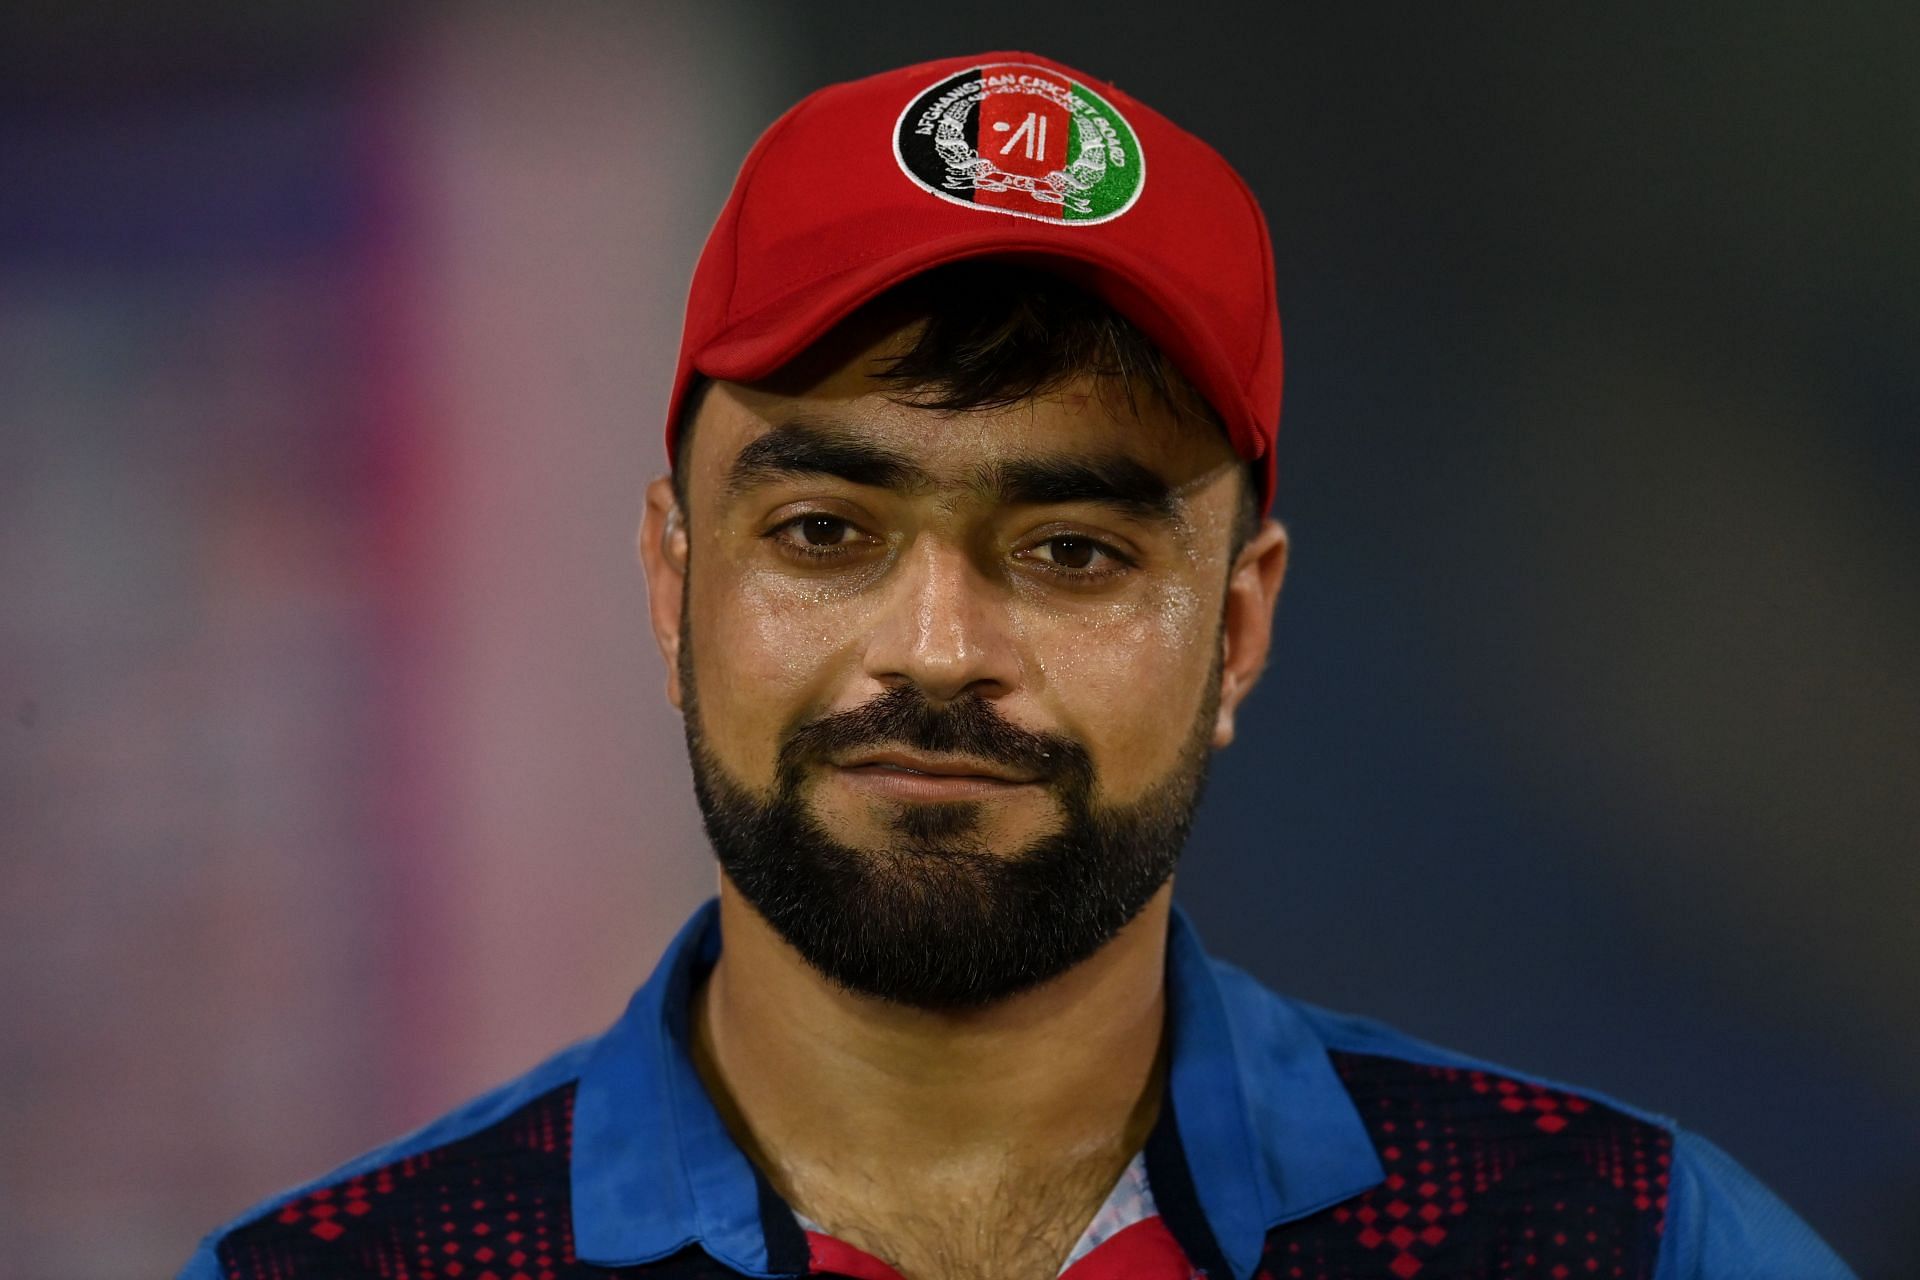 Rashid Khan has been ruled out of the T20I series against India